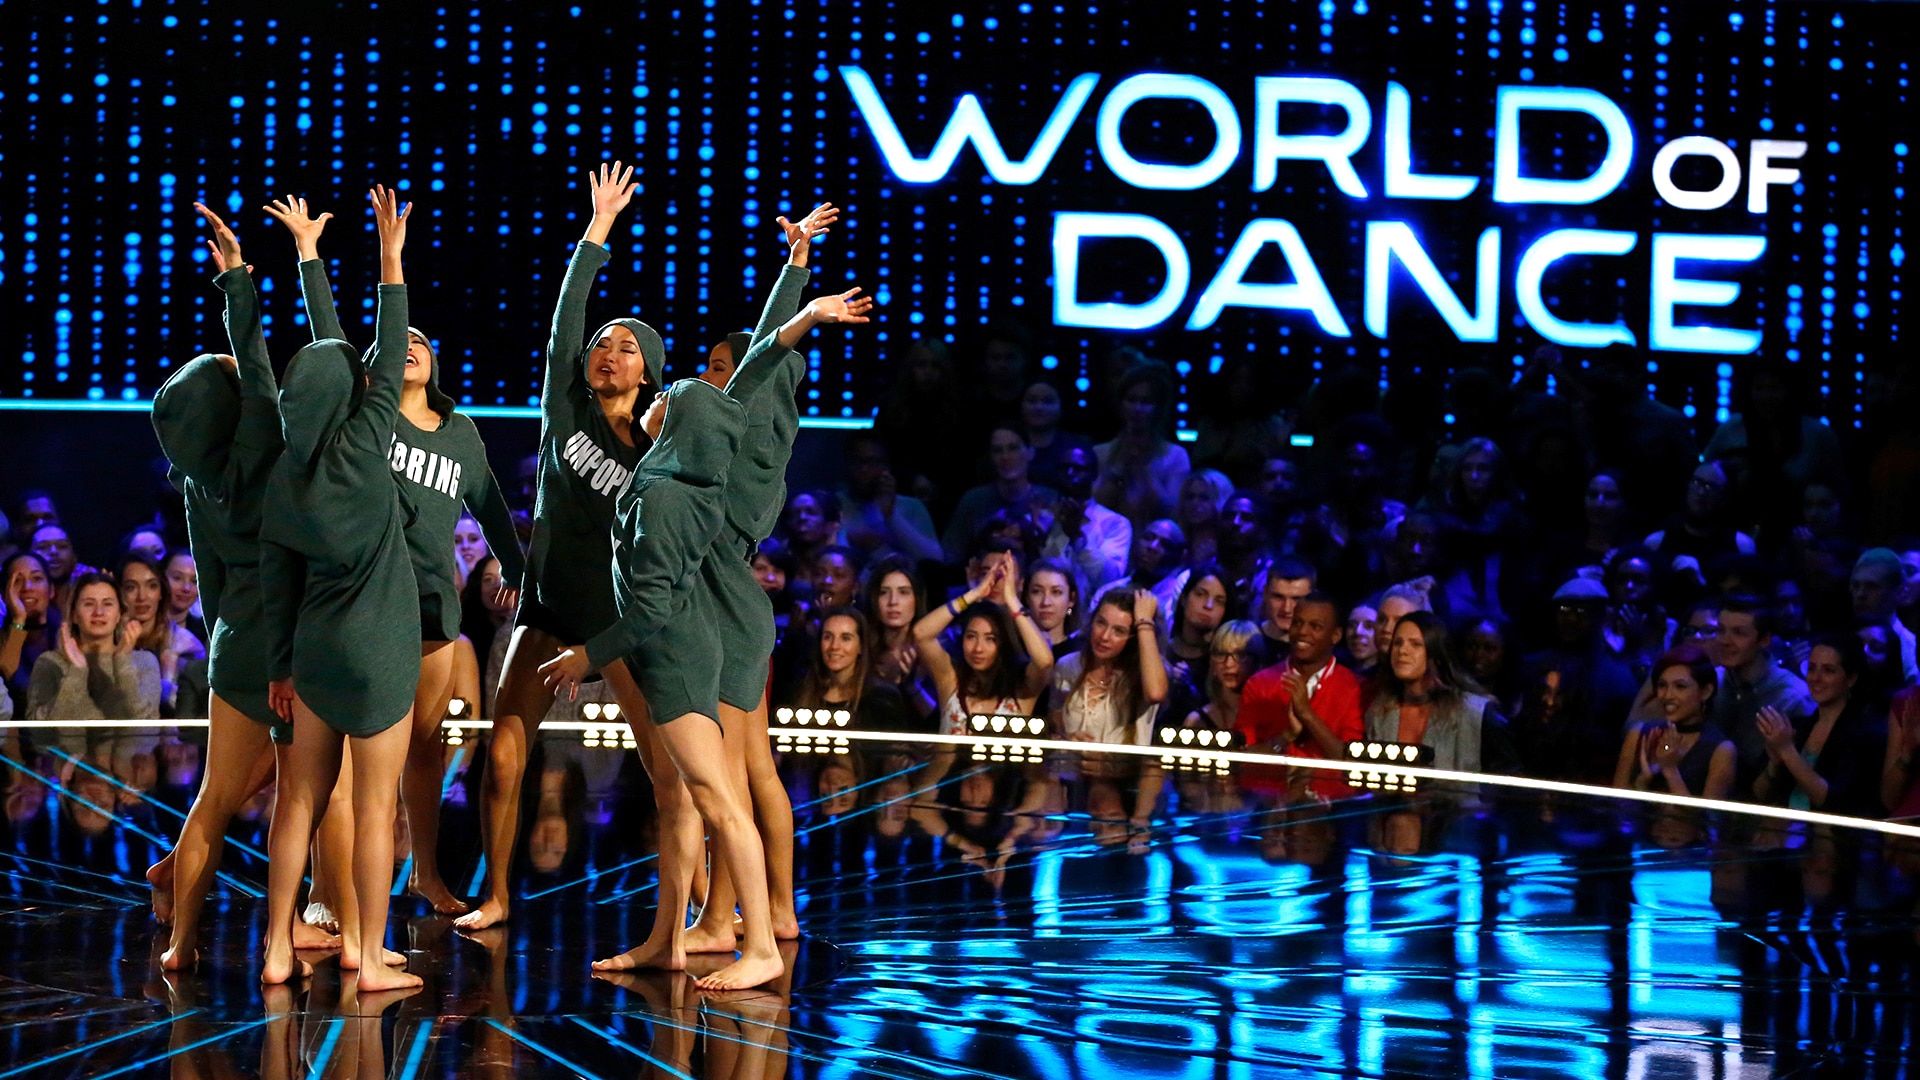 Watch World of Dance Current Preview: World of Dance: Trailer 